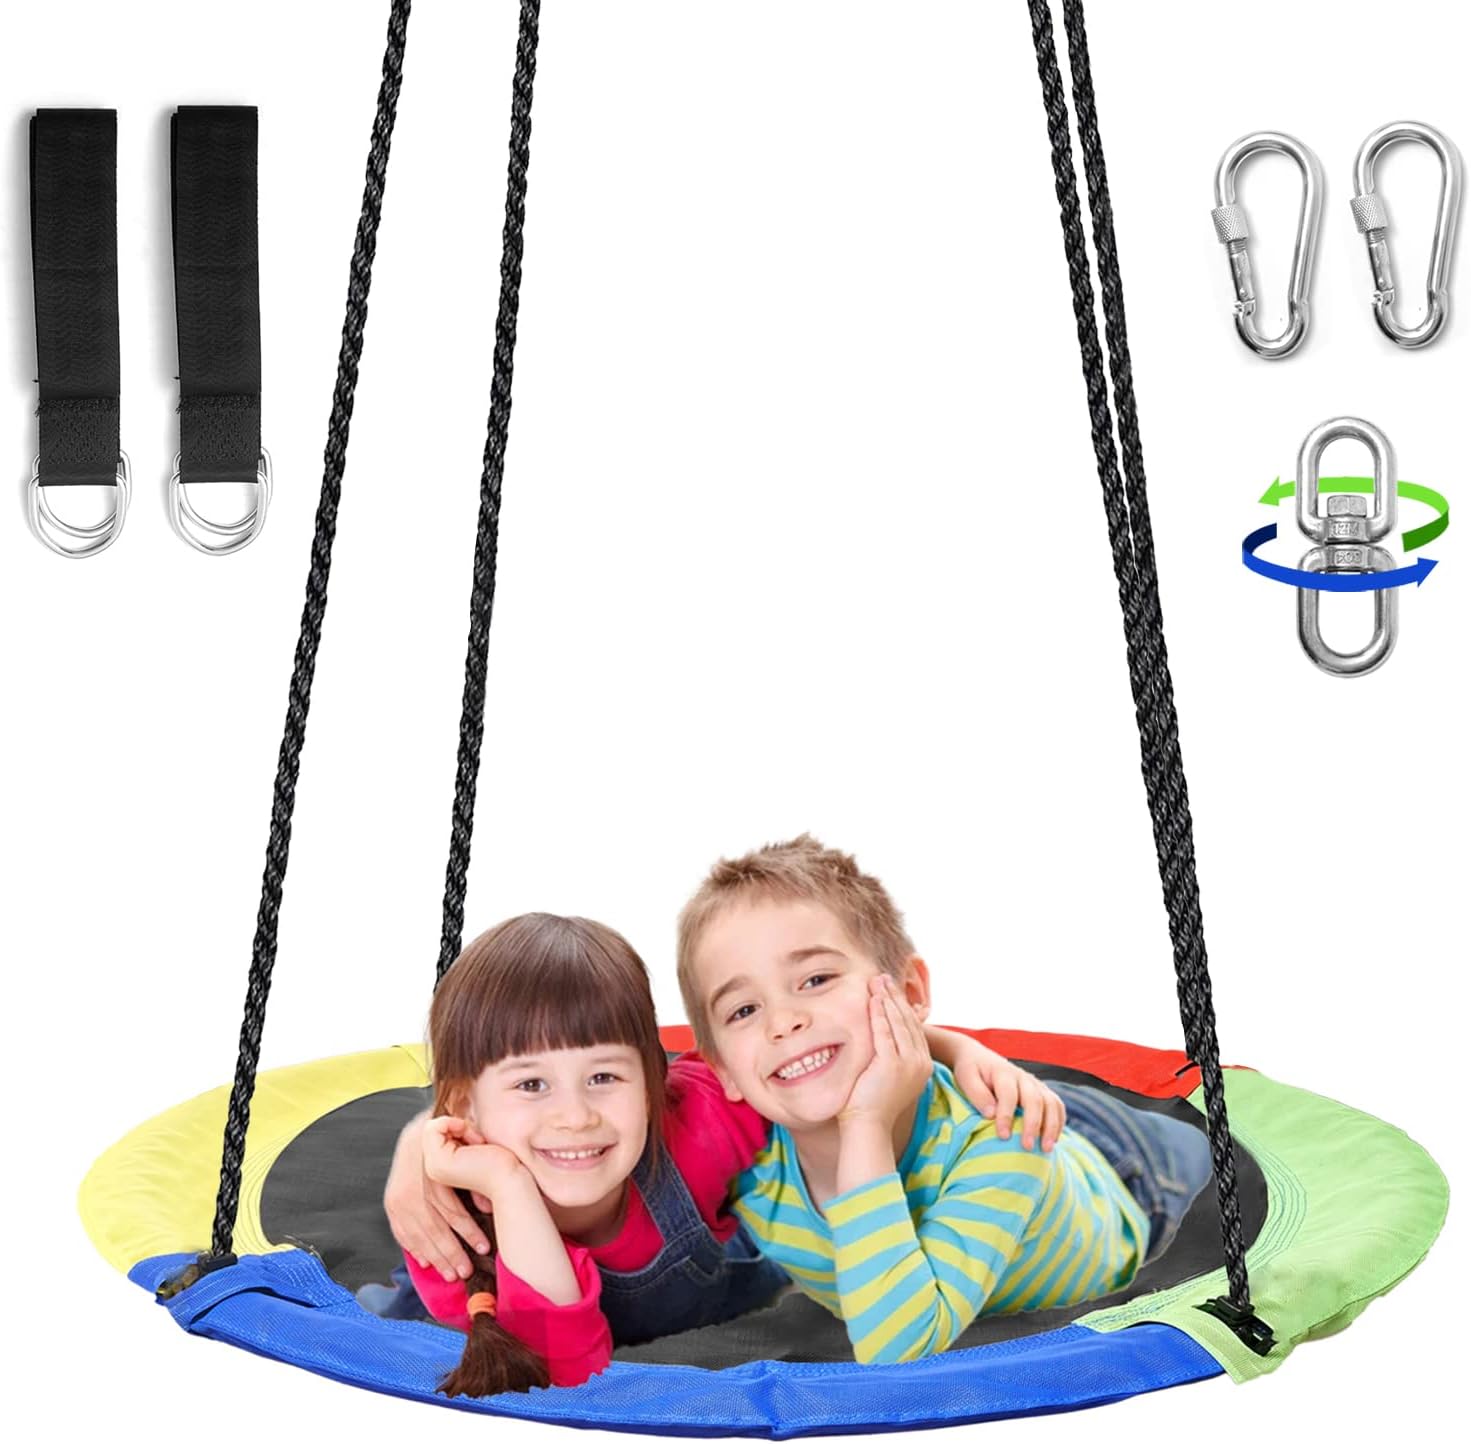 40" Flying Saucer Tree Swing Nest Hanging Rope Outdoor Garden Toys Gift for Kids 